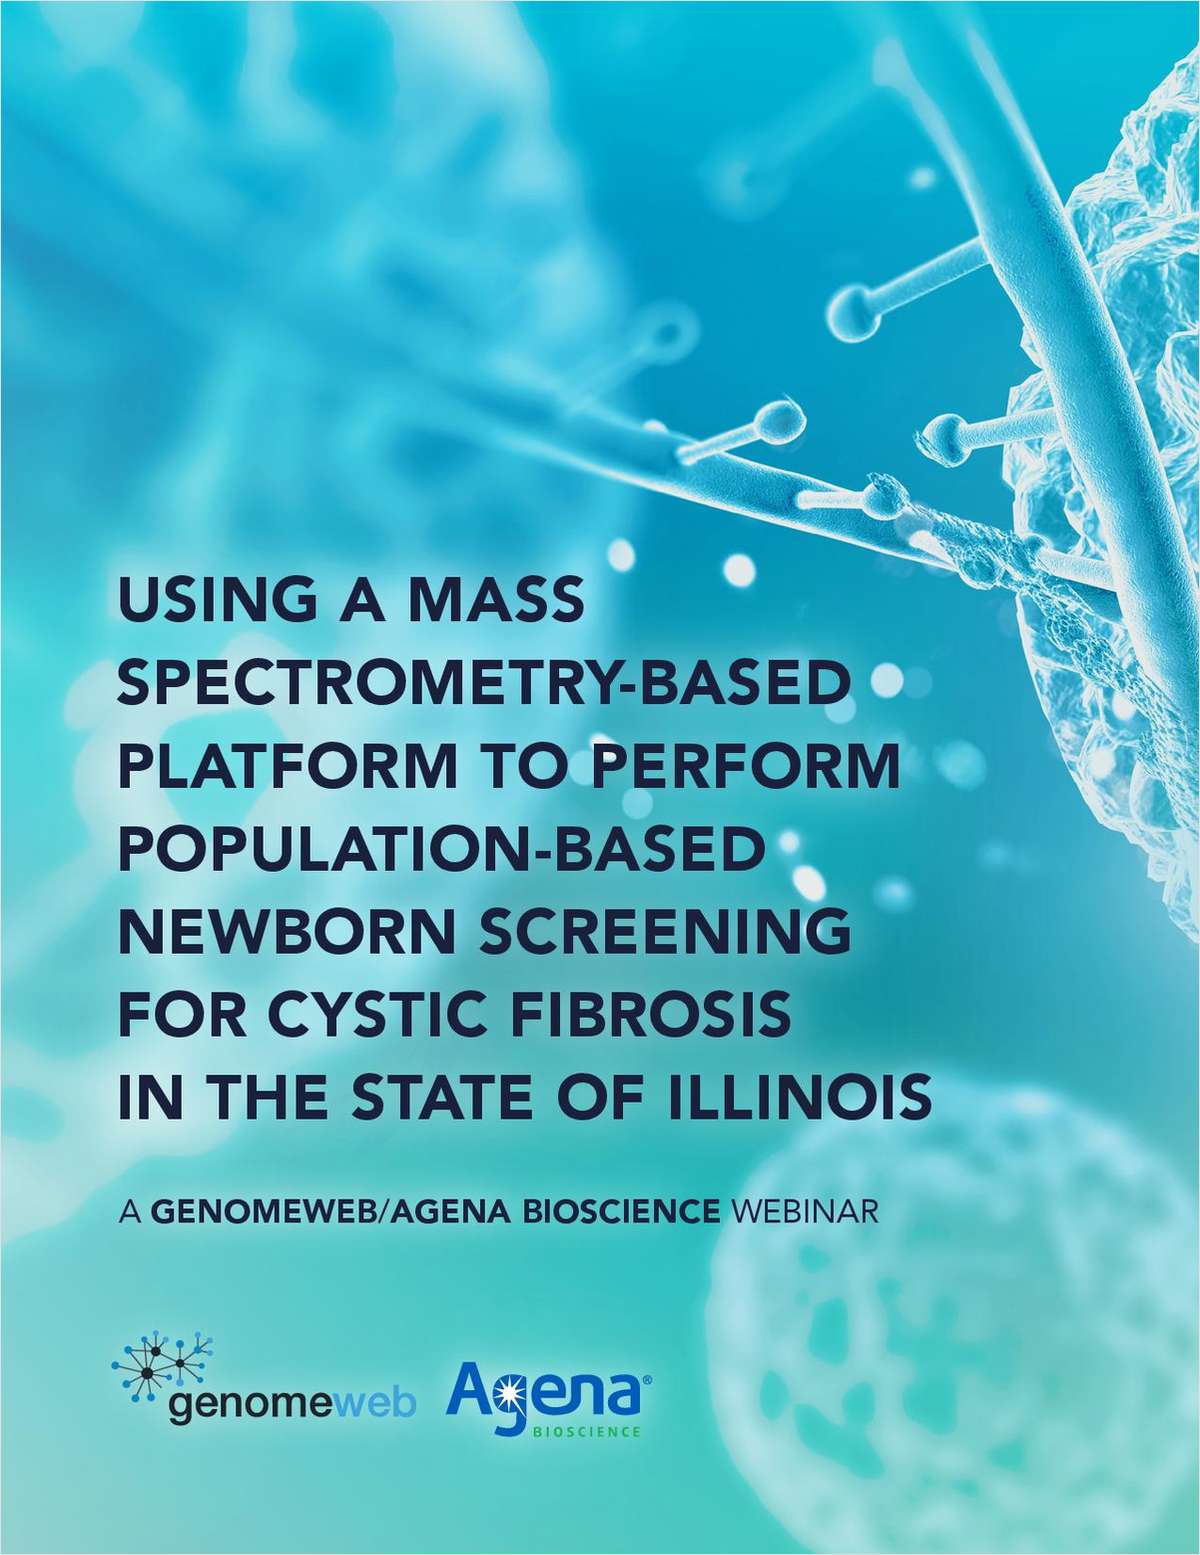 Using a Mass Spectrometry-Based Platform to Perform Population-Based Newborn Screening for Cystic Fibrosis in the State of Illinois